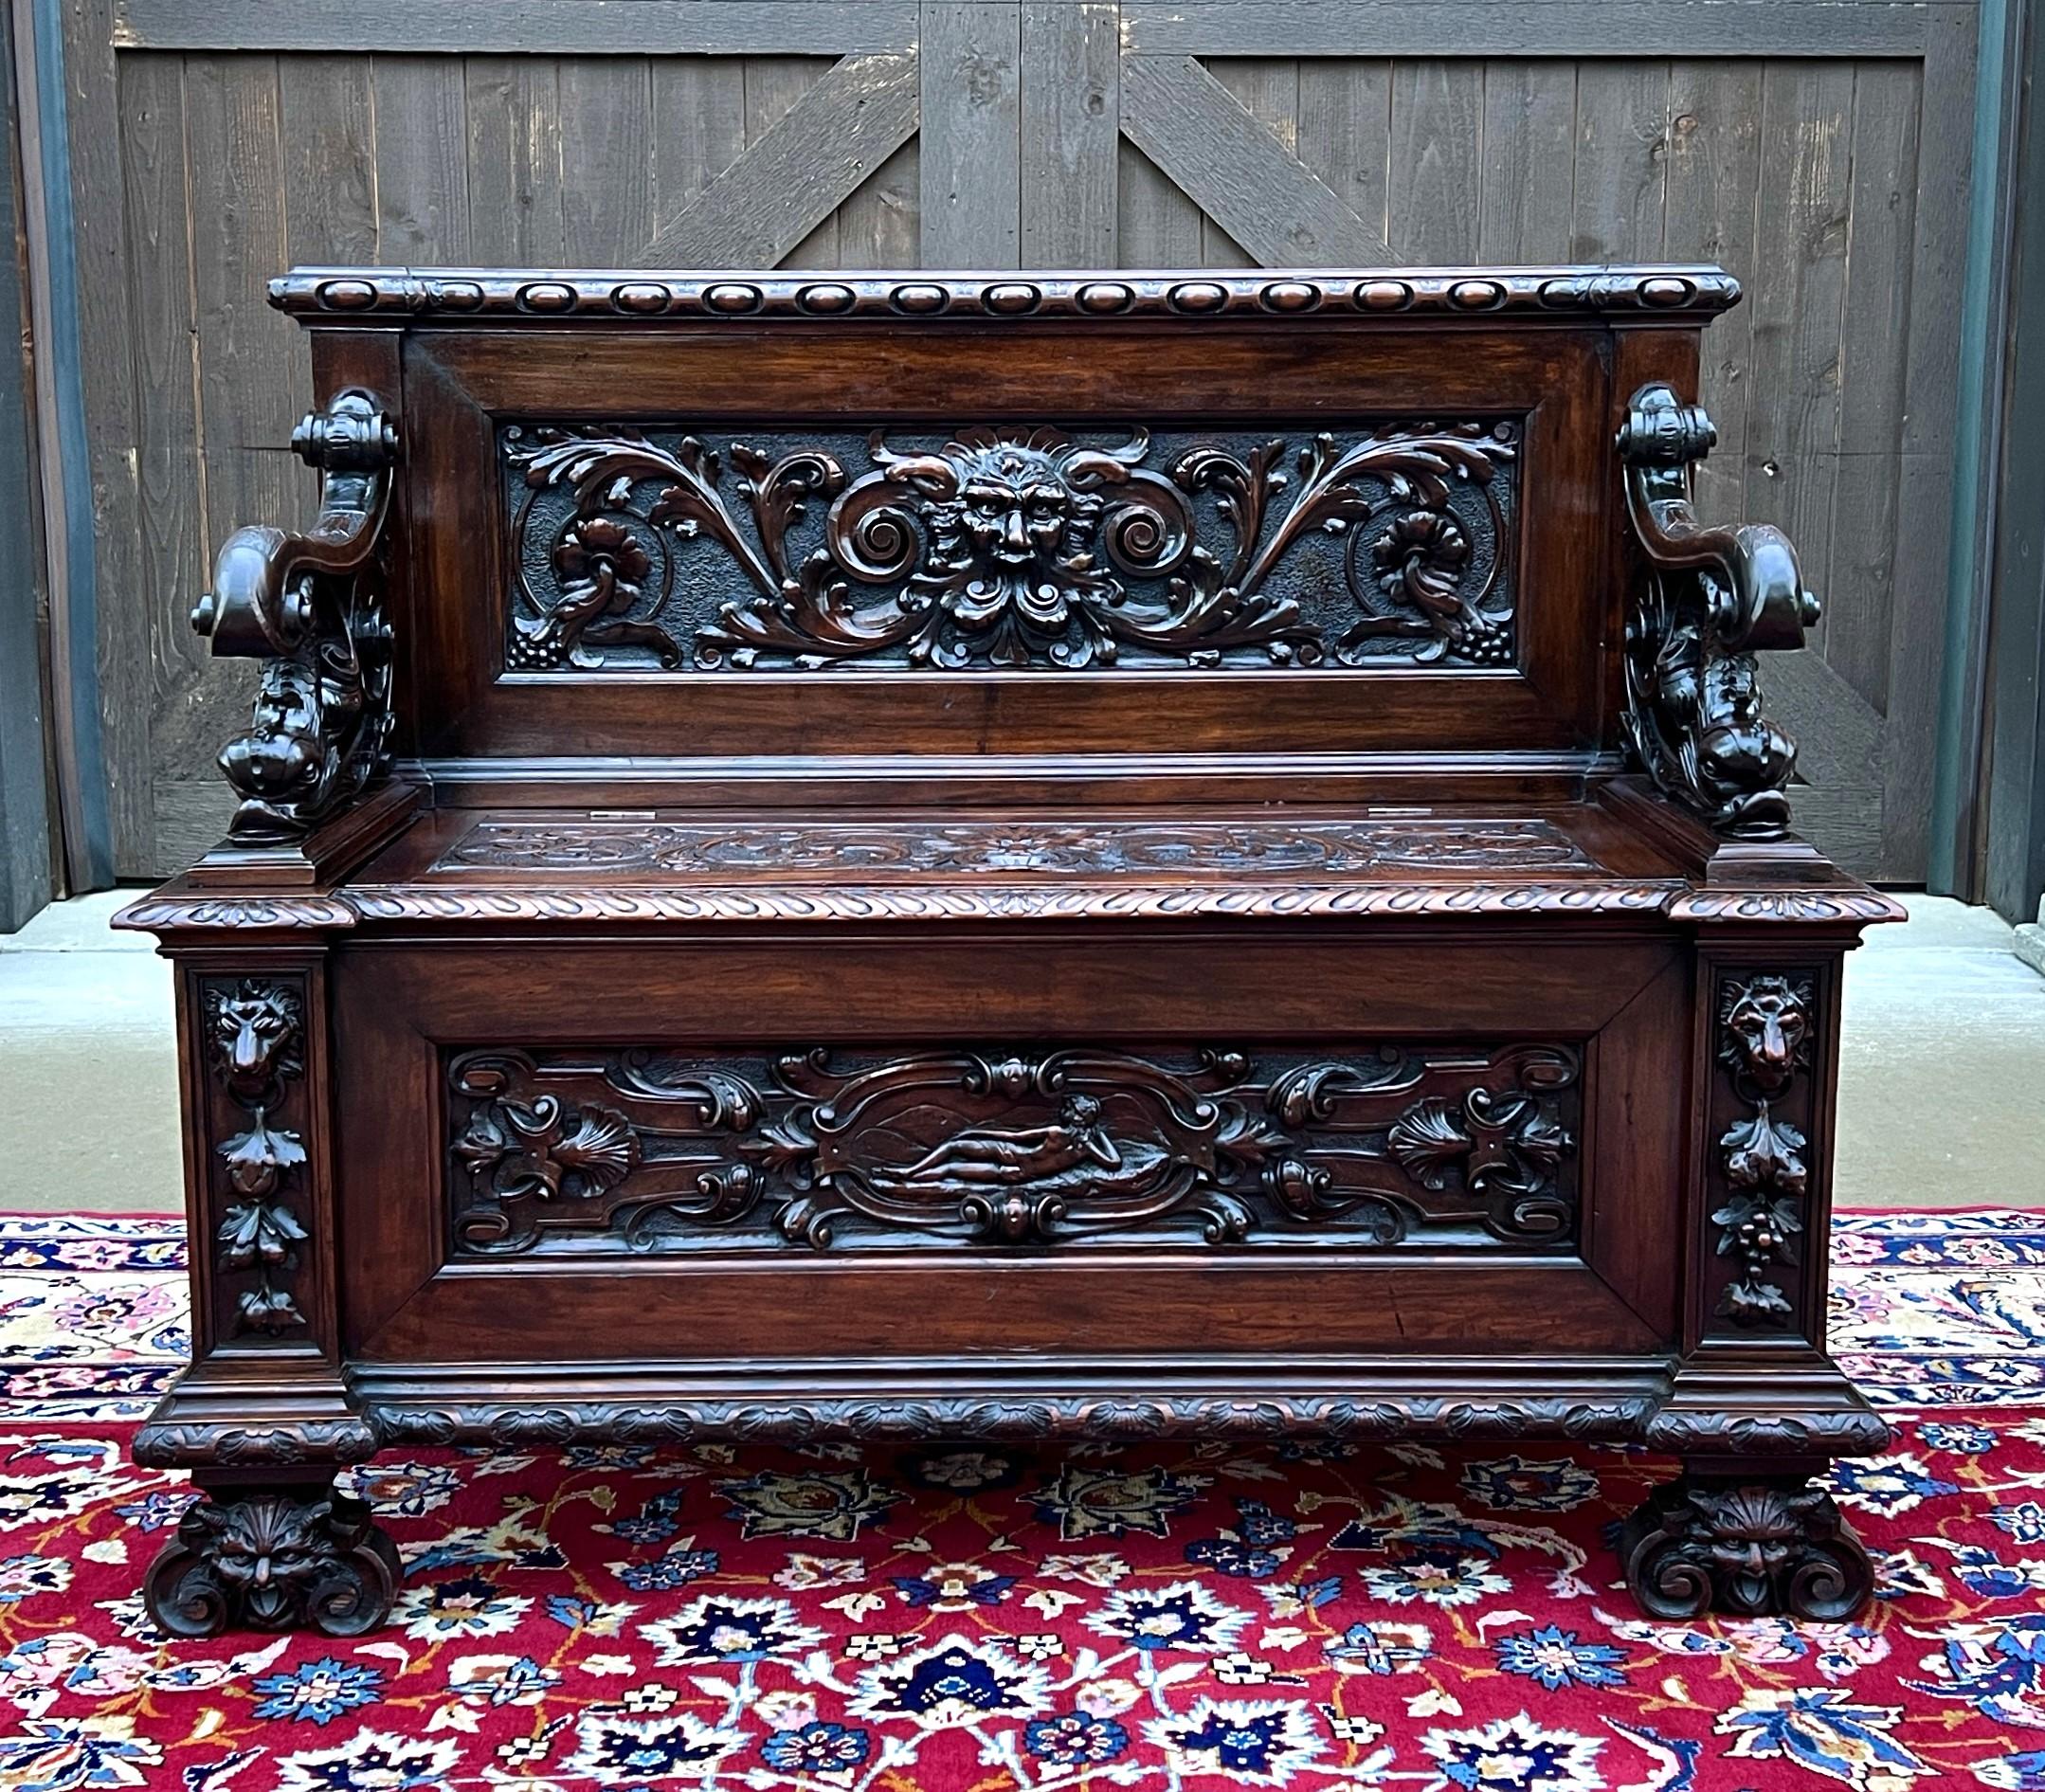 Carved Antique Italian Bench Settee Entry Hall Bench Renaissance Revival Walnut 19th C For Sale